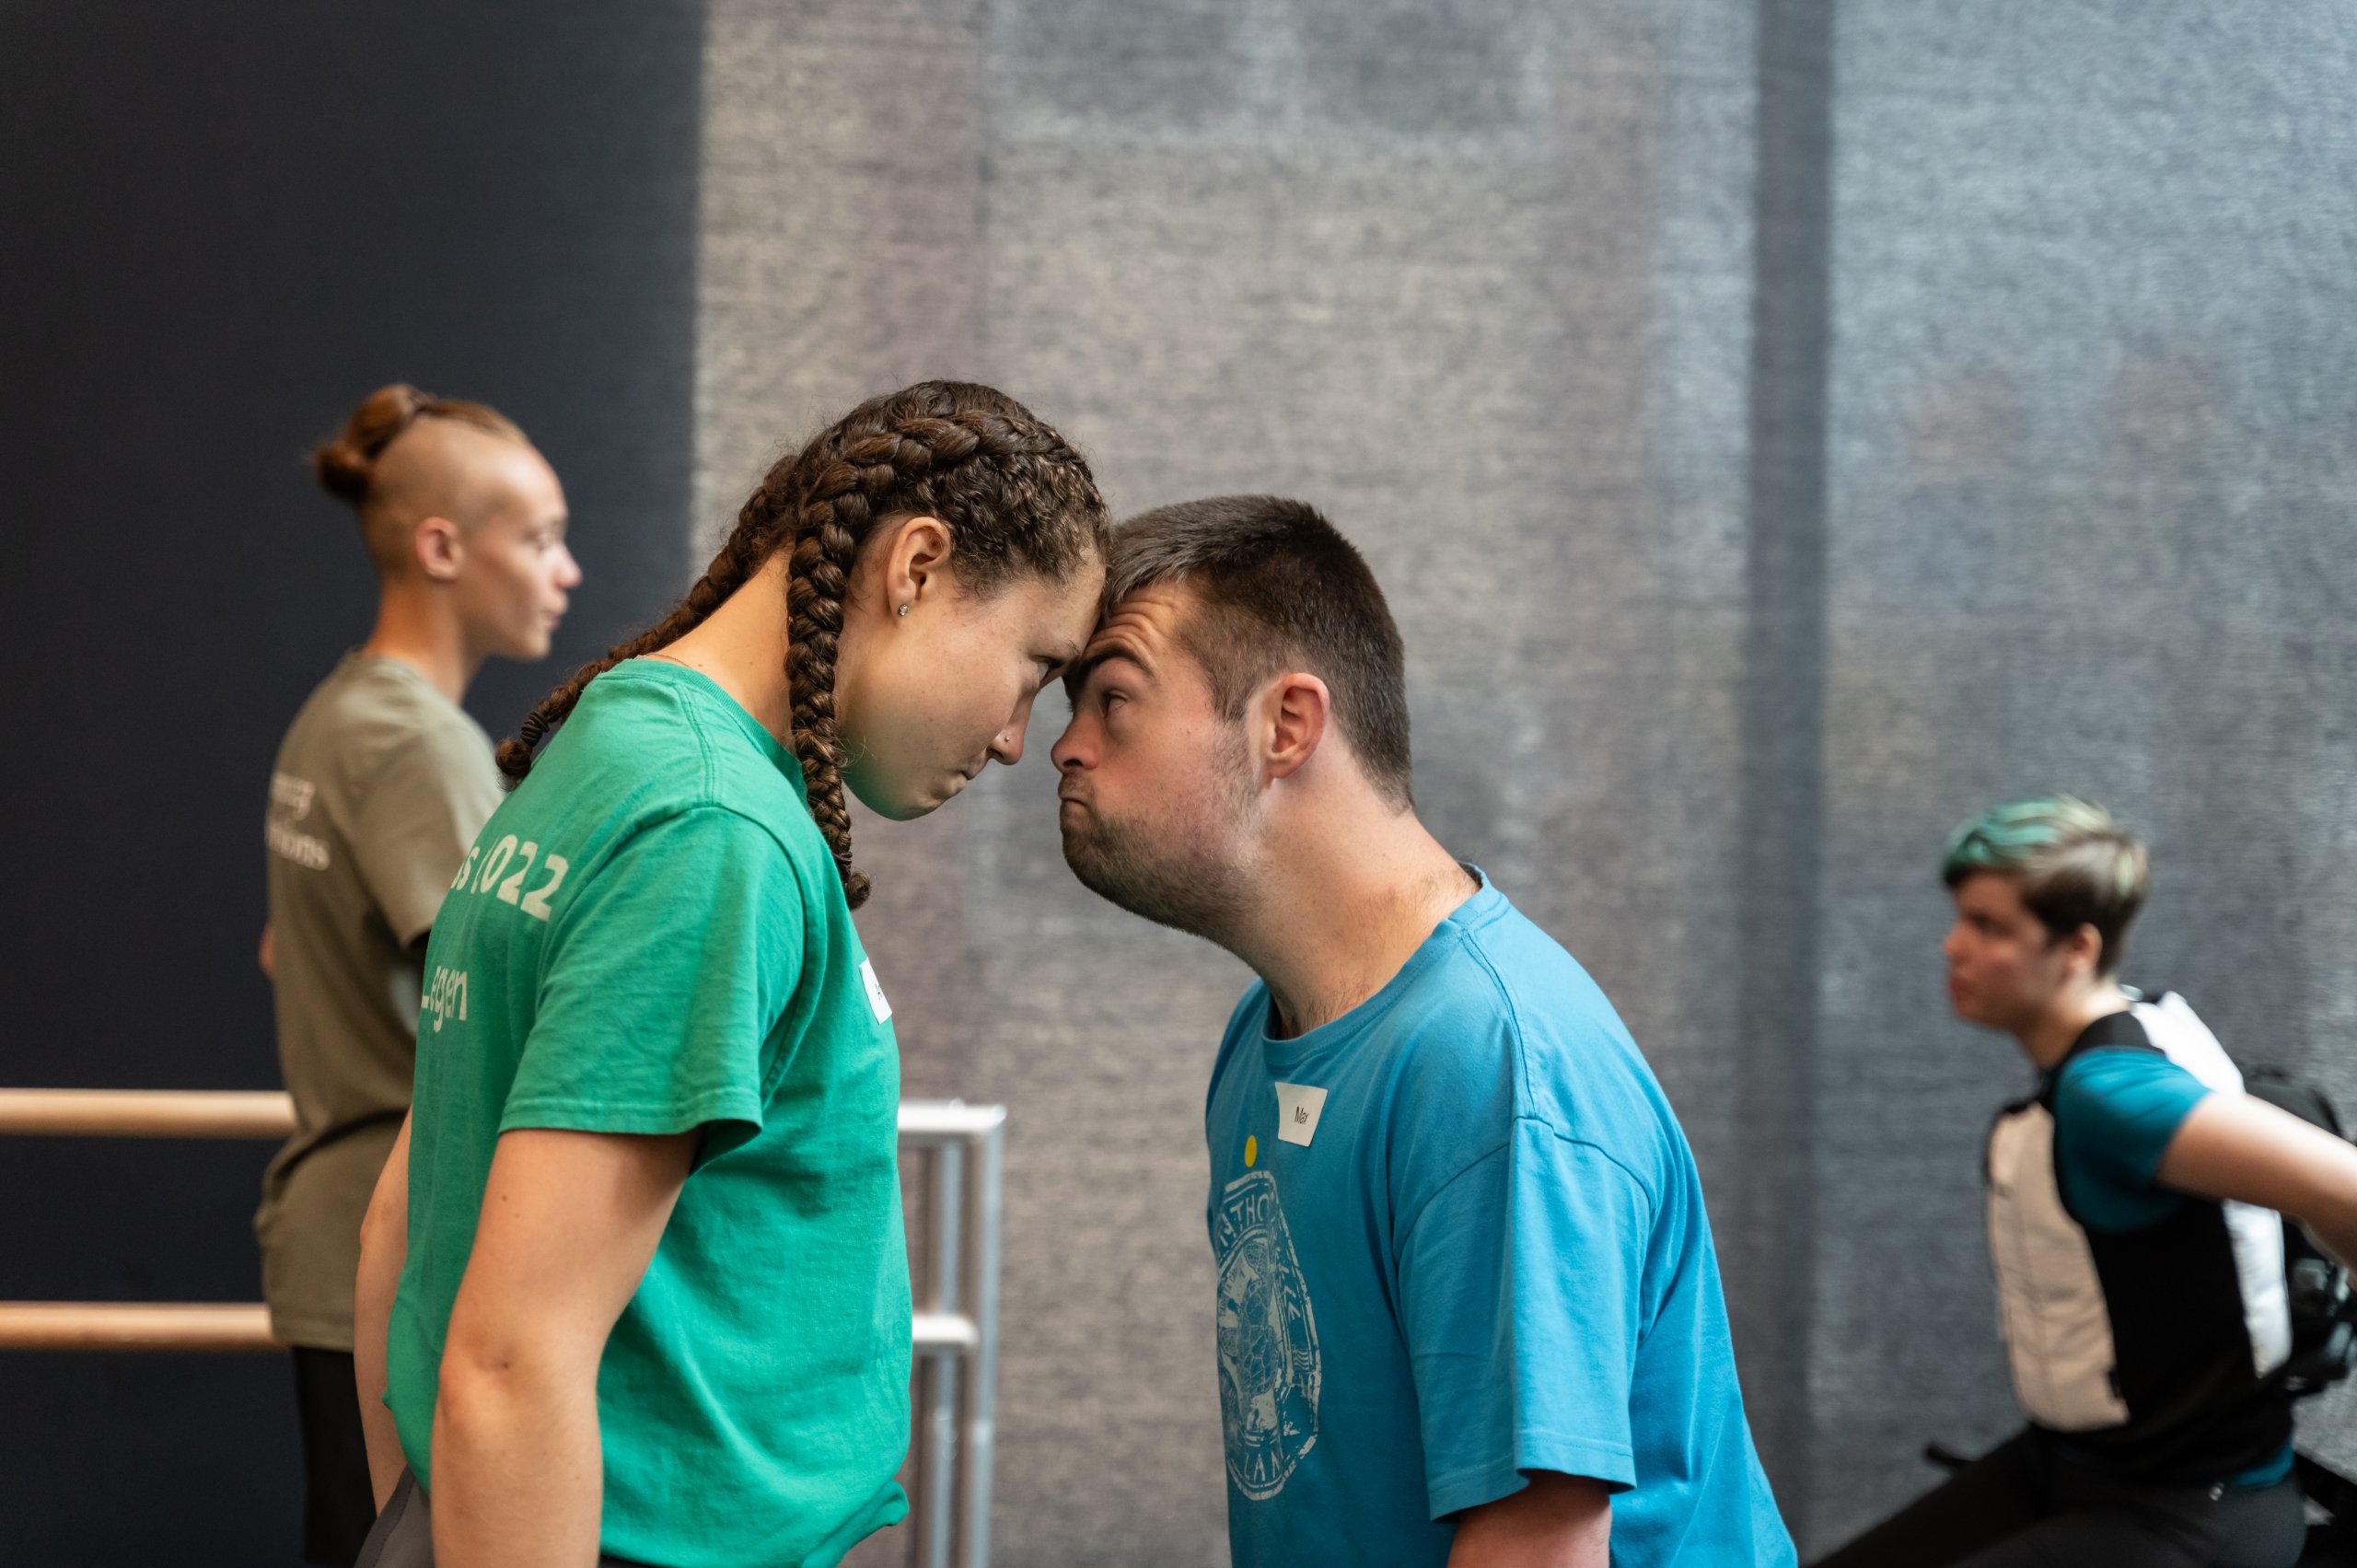 Two dancers making contact with their foreheads and making eye contact. One dancer is in a blue t-shirt and another in a green t-shirt. There are two people dancing in the background. 